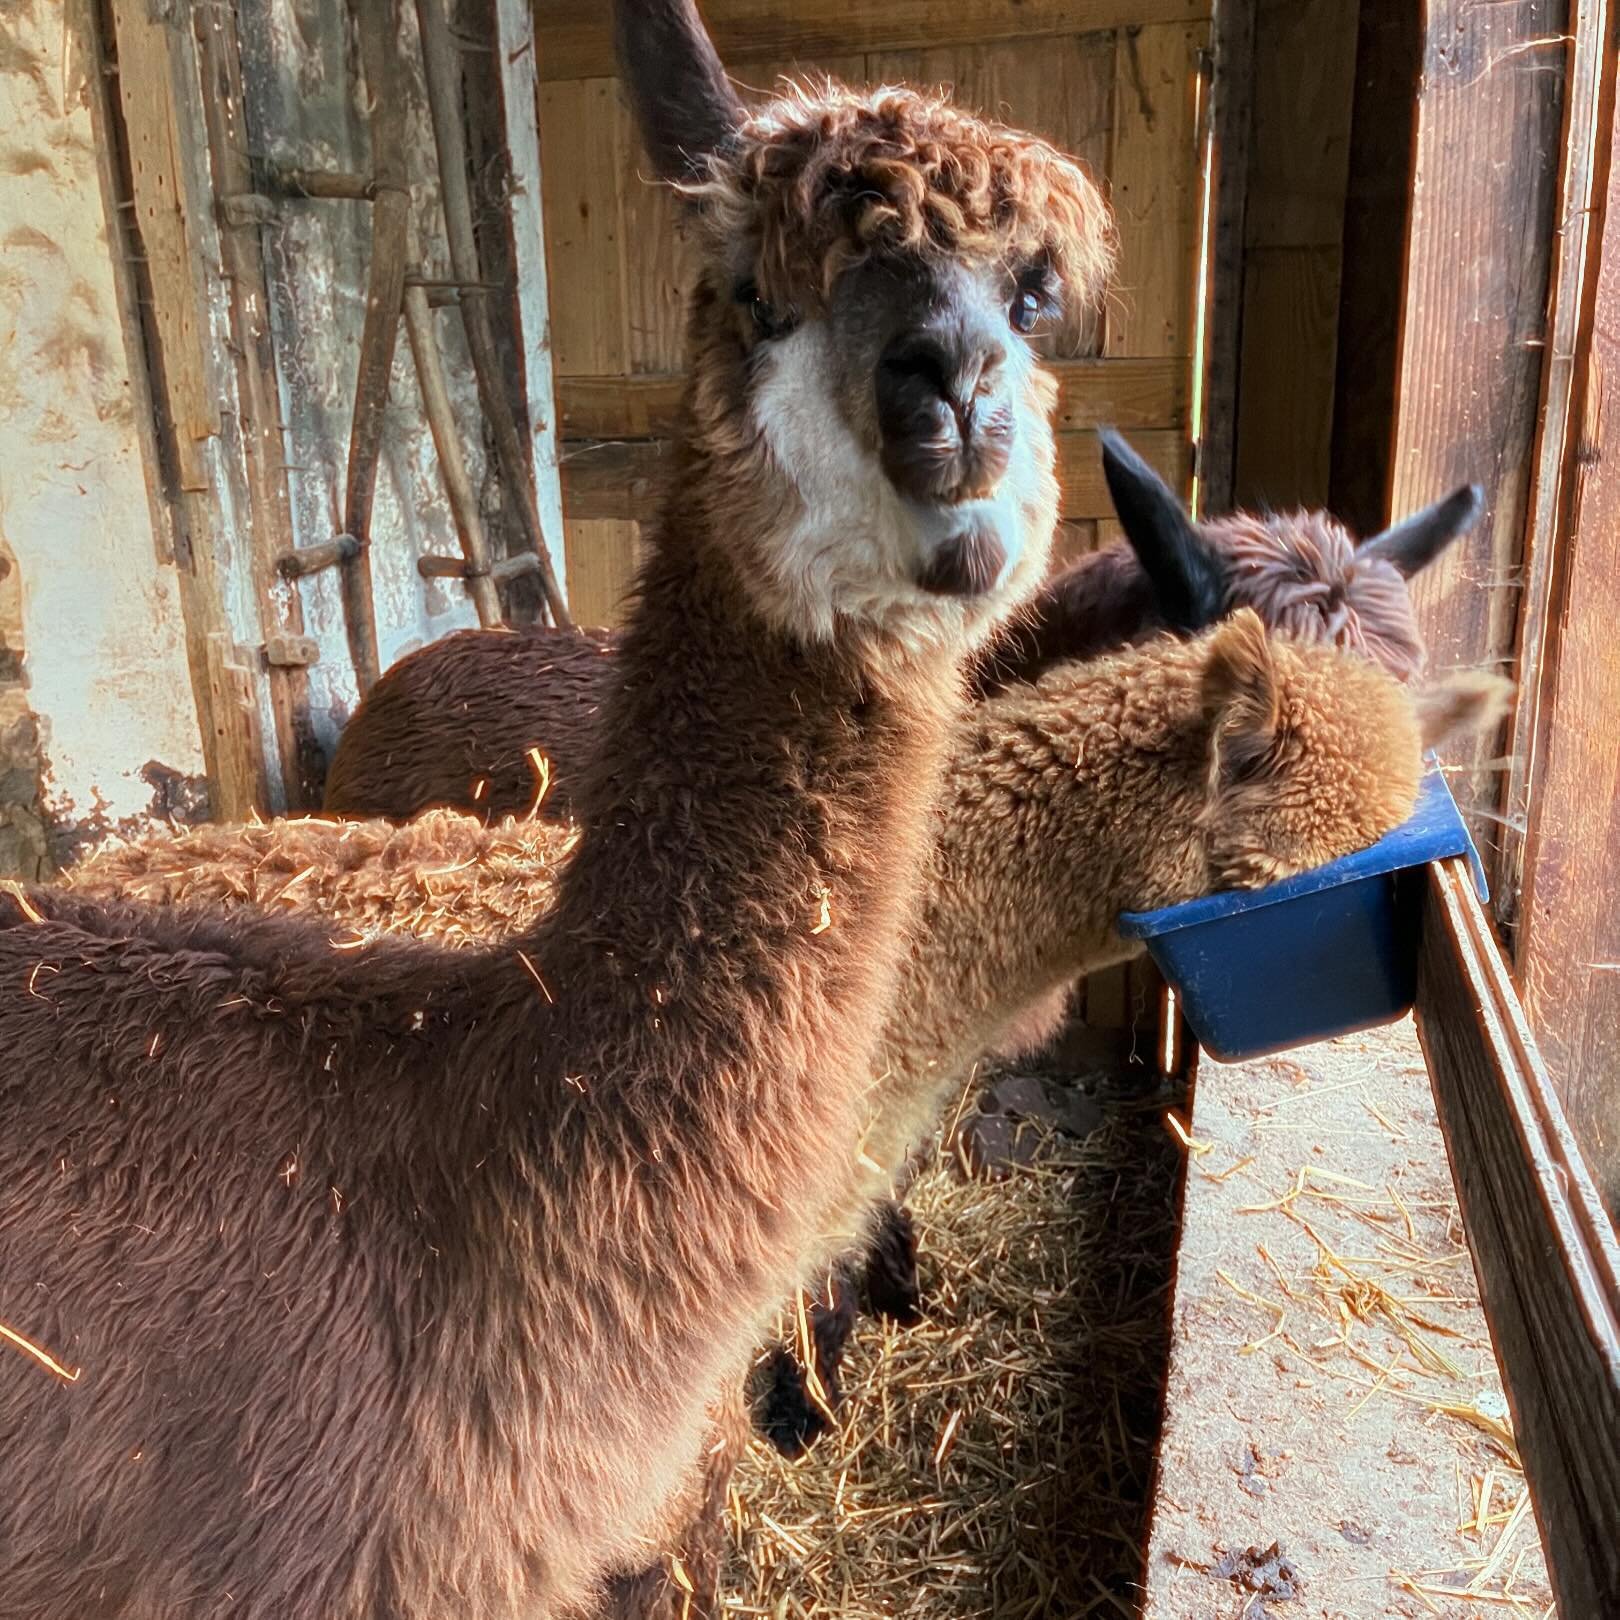 With the forecast calling for storms  over the next few days 🌩️ we decided to move the alpacas down to the barn #storms #berkscounty #alpacas